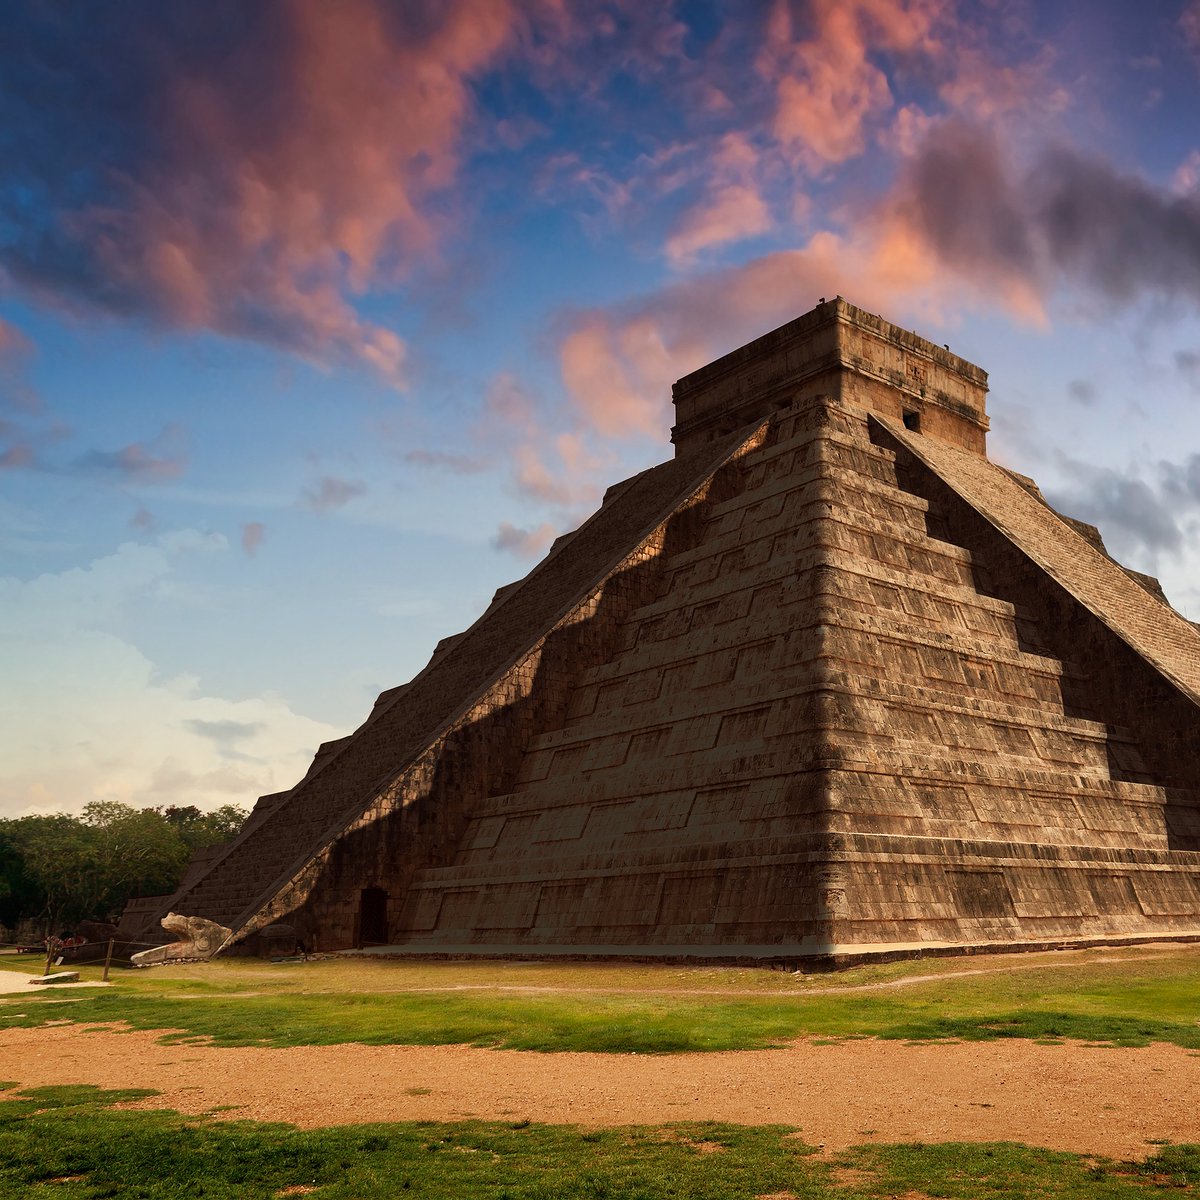 Today is the #FallEquinox, the #FirstDayOfFall 🍁🎃🍂

At sunset on both the spring and fall equinox, a carefully constructred play of light and shadow create the illusion of a serpent slithering down #Mexico's Temple of Kukulcan' at Chichén Itzá.